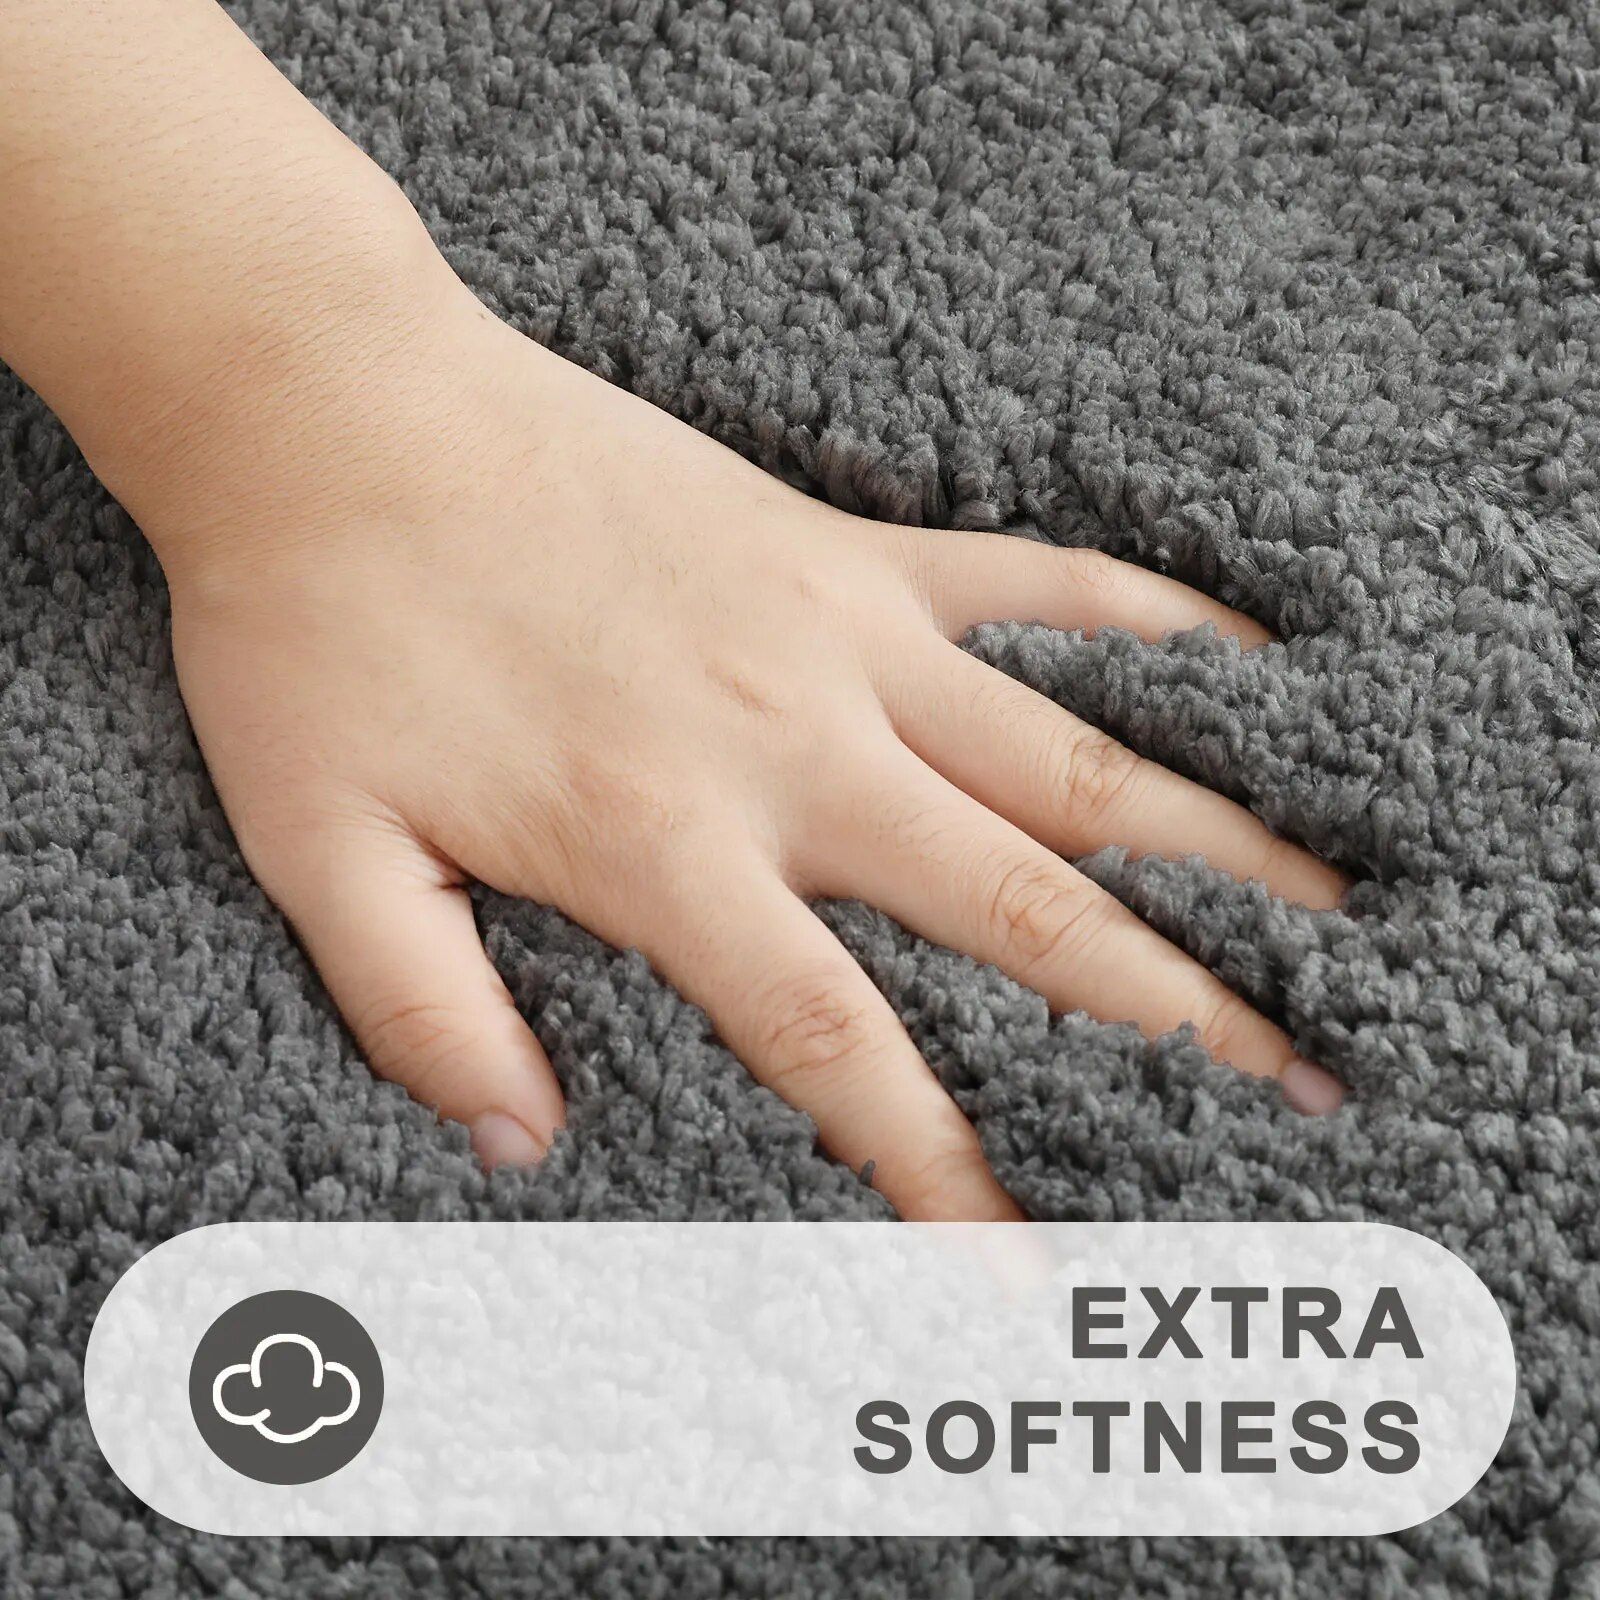 Luxurious Quick-Dry Absorbent Plush Bath Rug - Anti-Slip, Soft, and Durable for Home Decor 